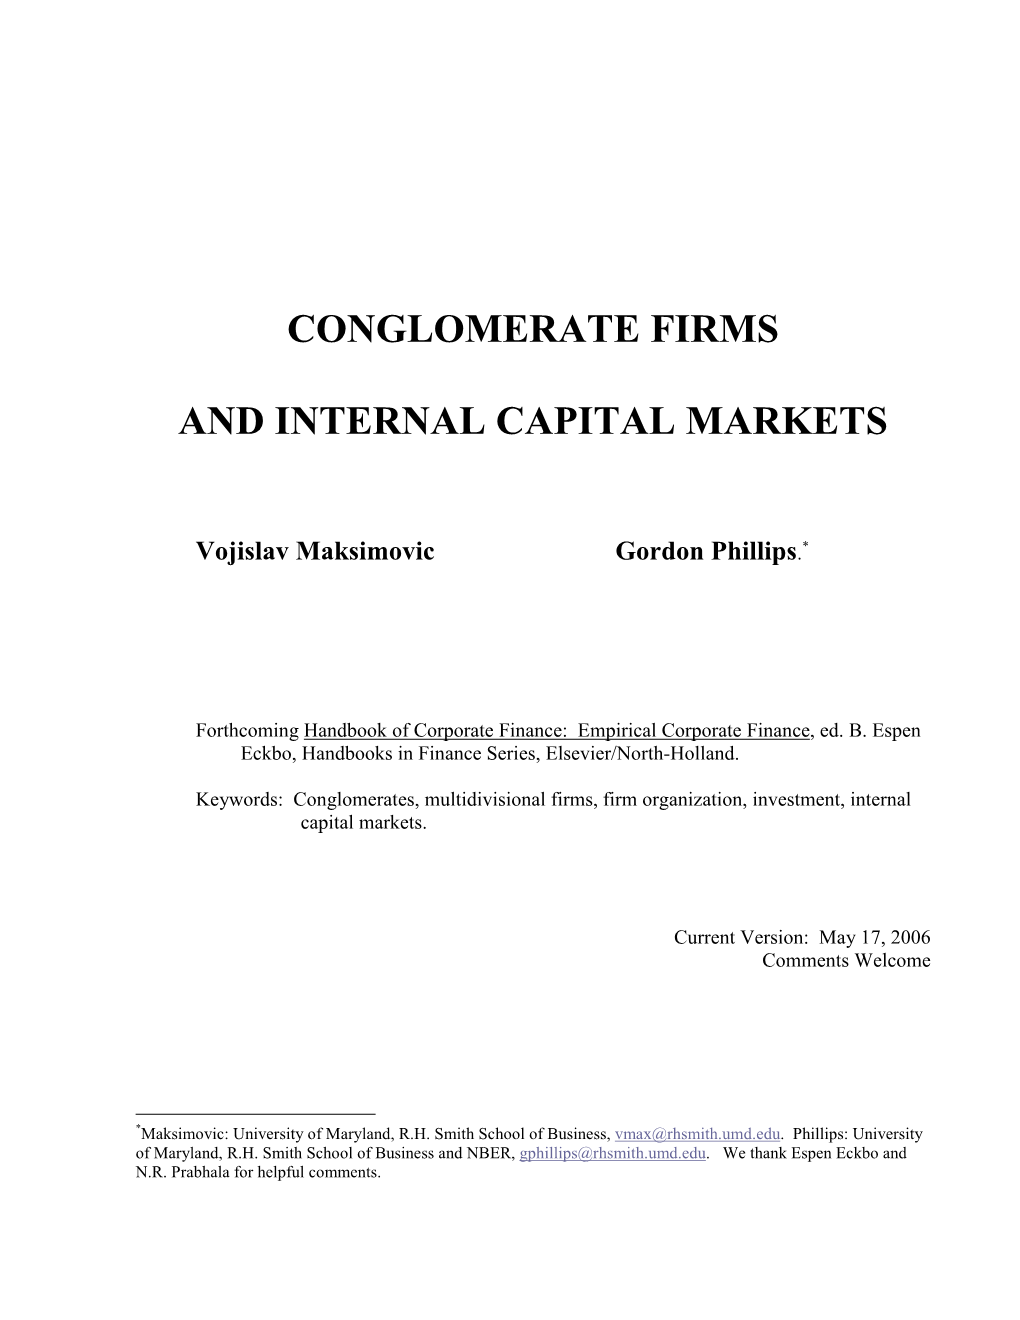 Conglomerate Firms and Internal Capital Markets